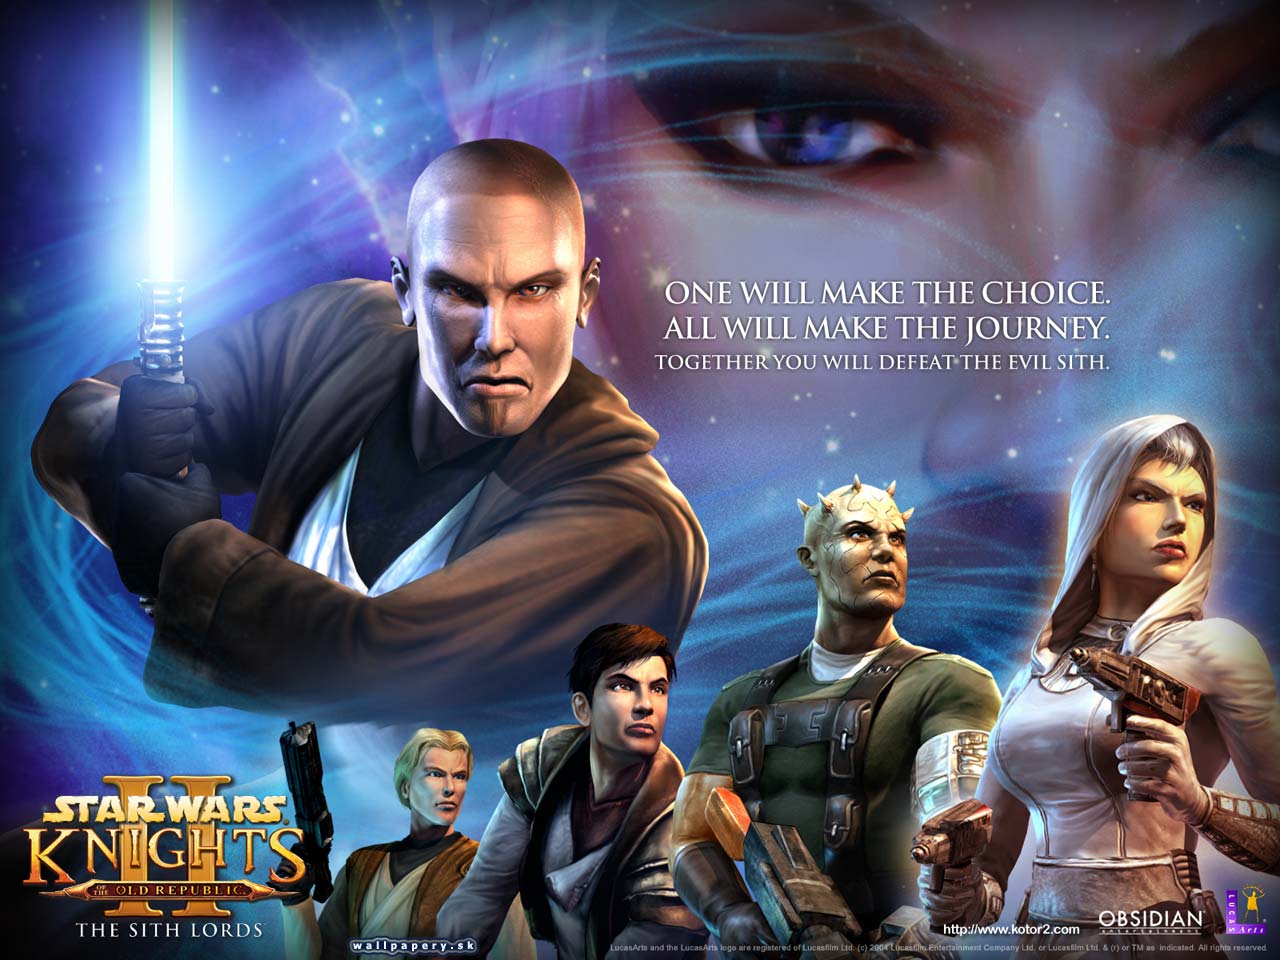 Star Wars: Knights of the Old Republic 2: The Sith Lords - wallpaper 4